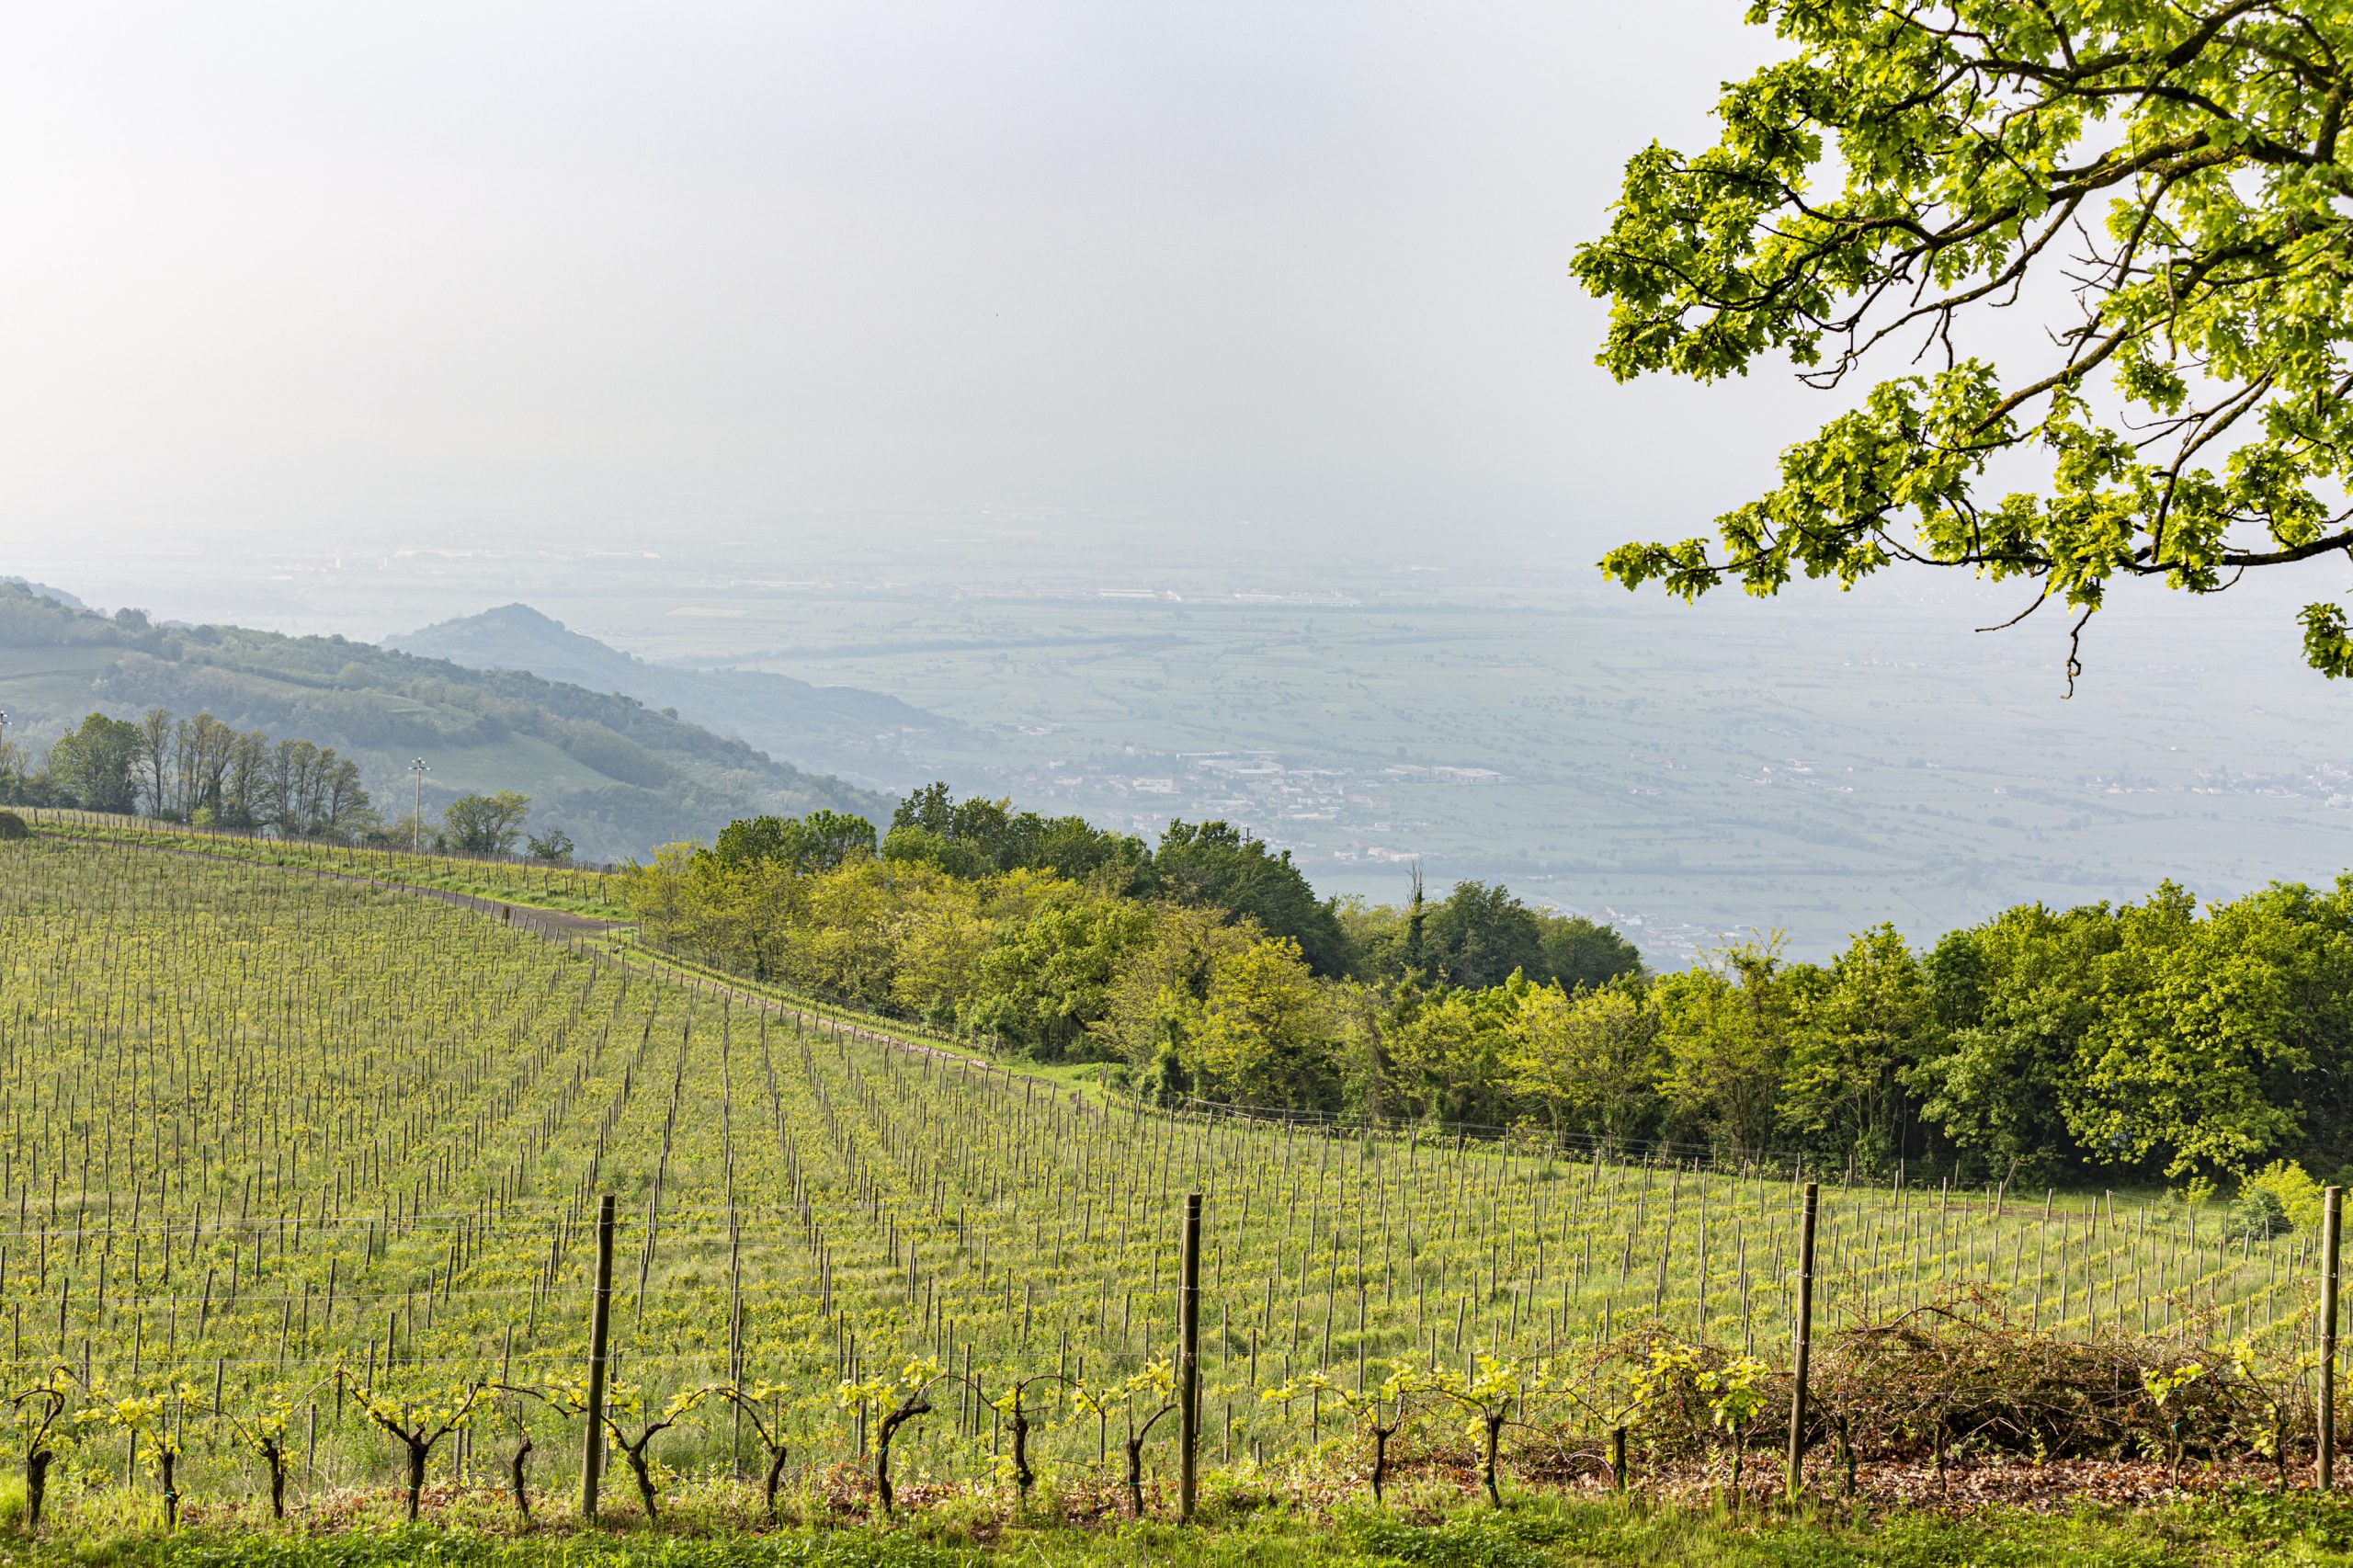 Vineyards in the Soave region, where Hey French is made.